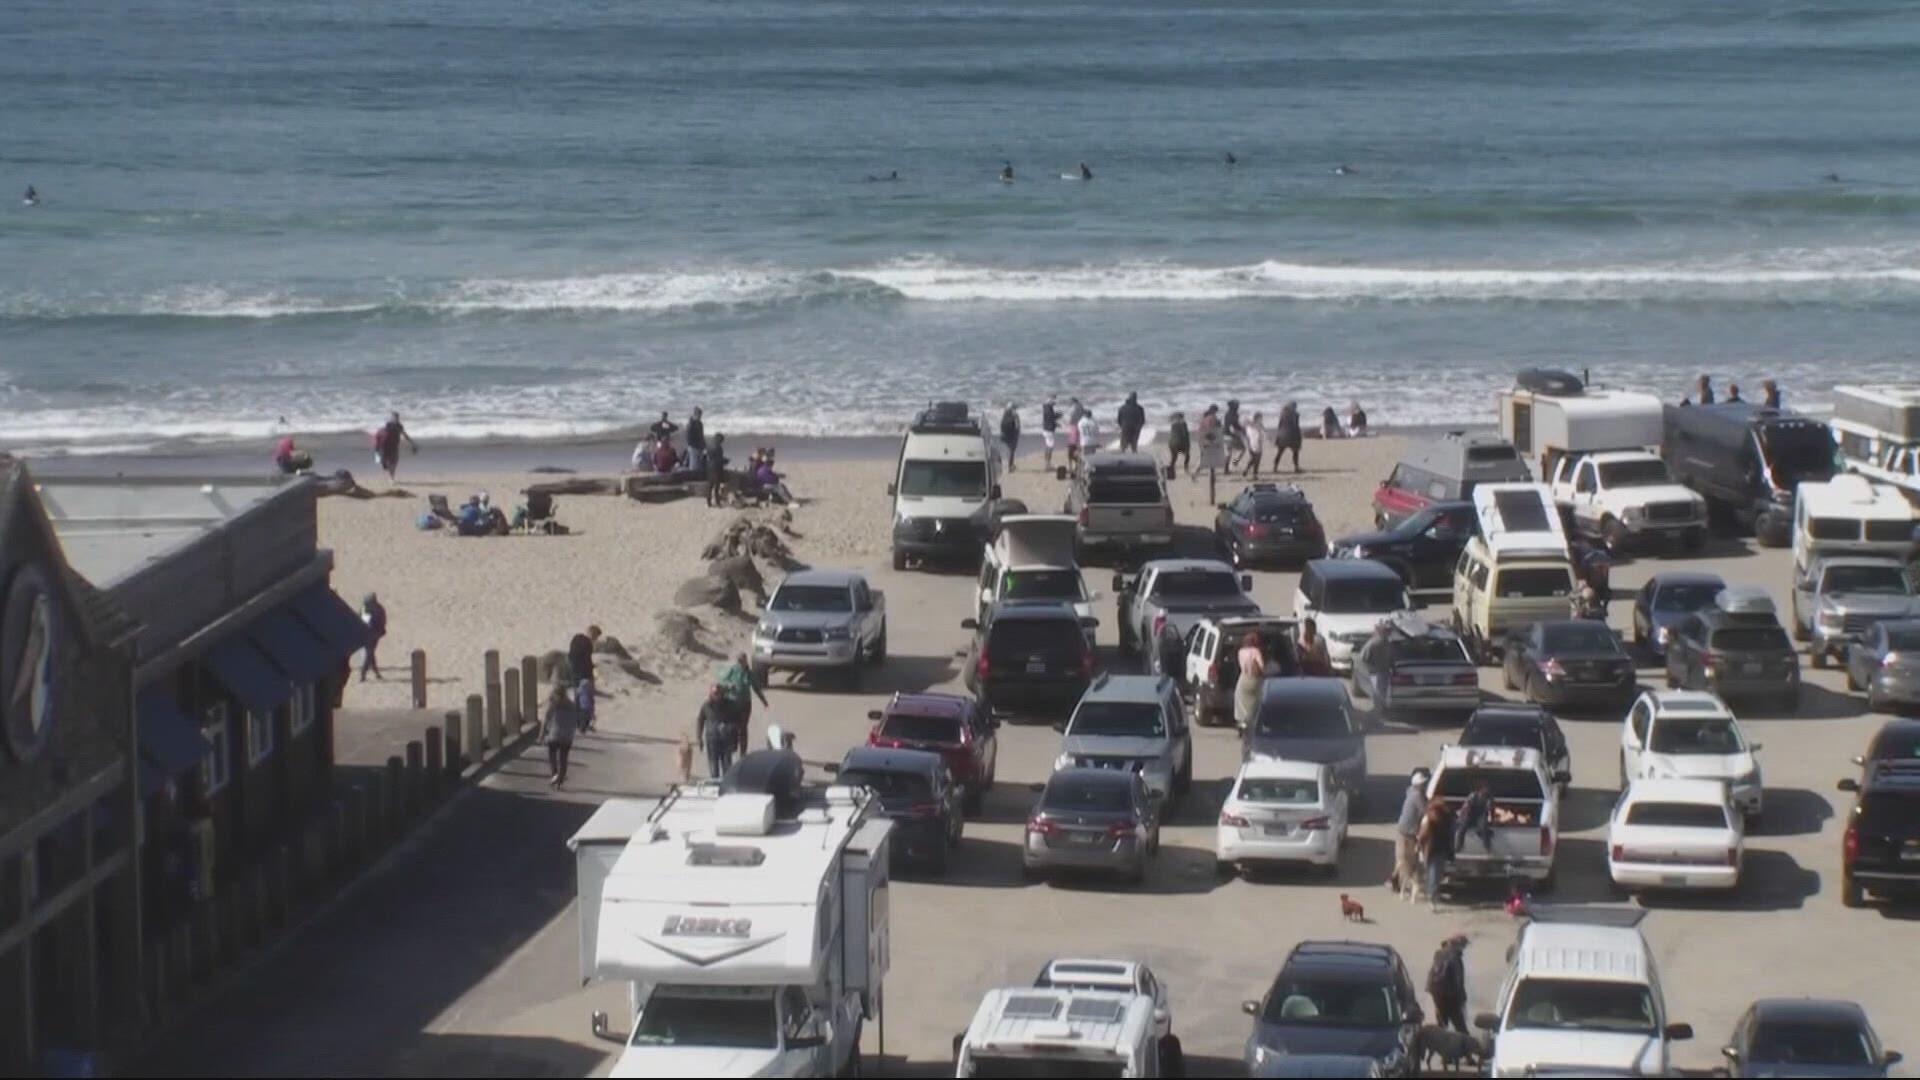 Coastal communities are expecting people to arrive during spring break. As Keely Chalmers reports, last year tourist towns were telling people to stay away but this